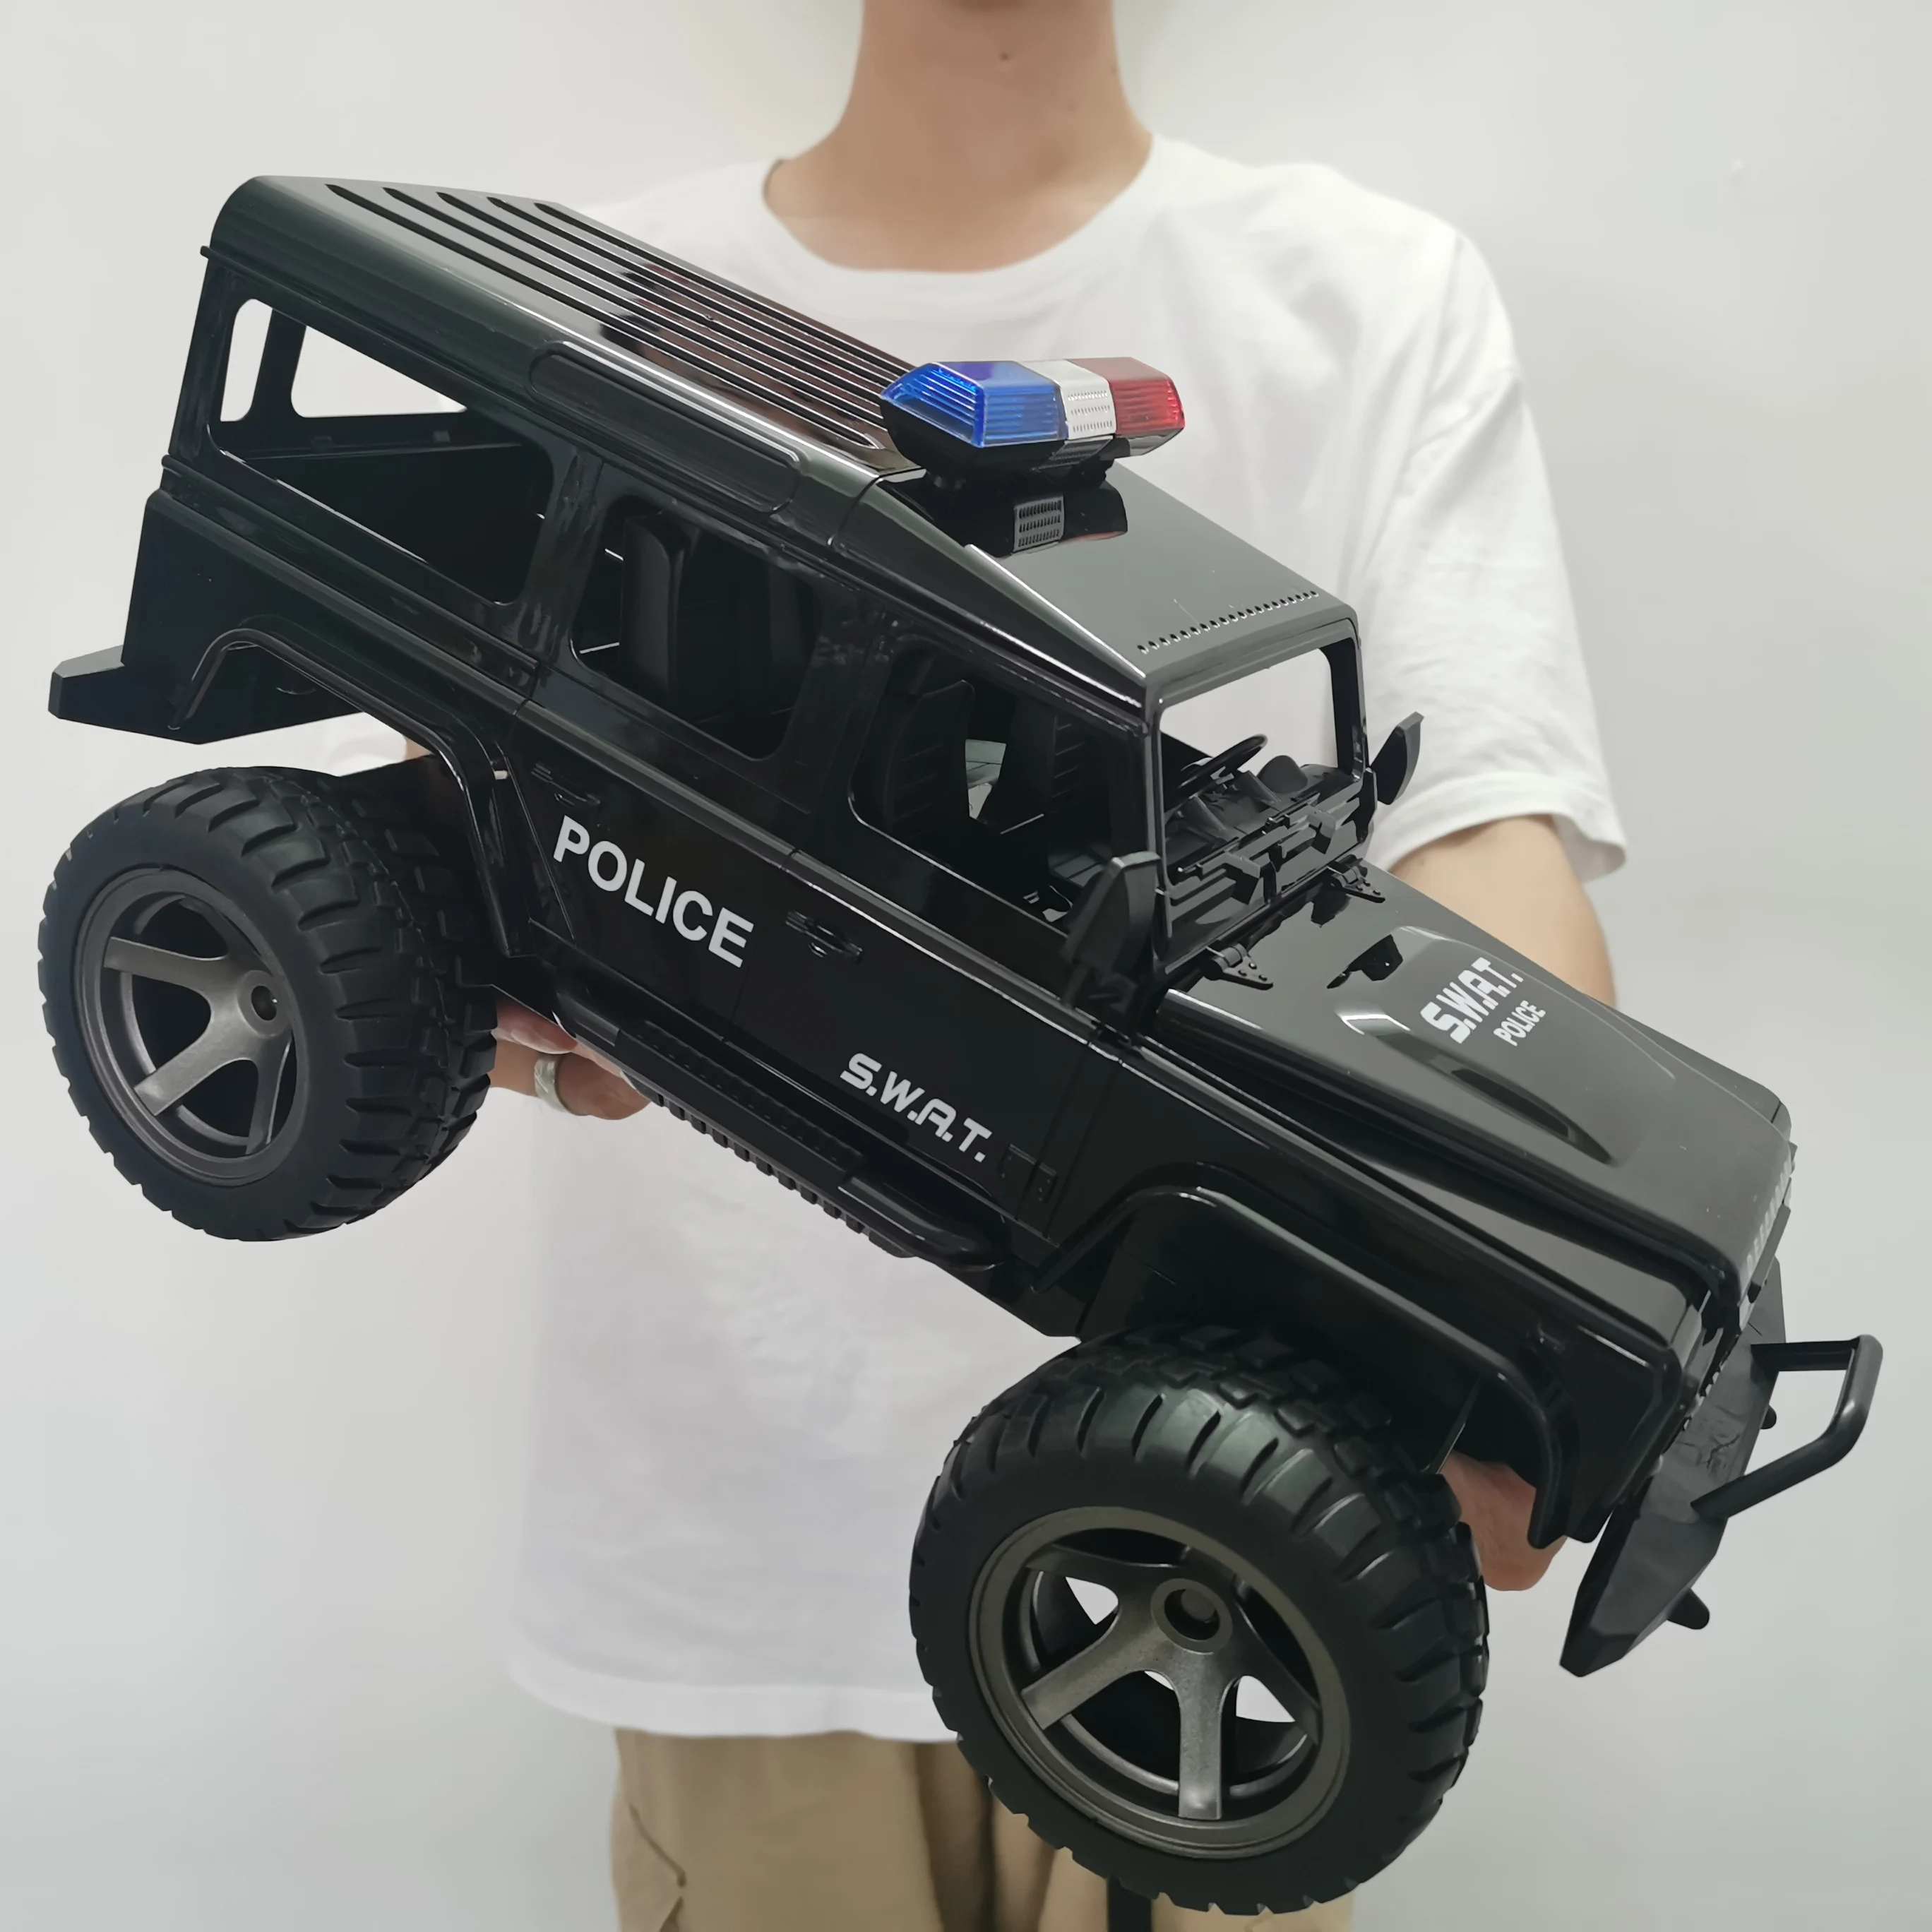 Double E 1:14 Large Land Rover D110 Police Offroad Buggy Big Remote Control vehicles Climbing Car Children Toys for Boys Gifts